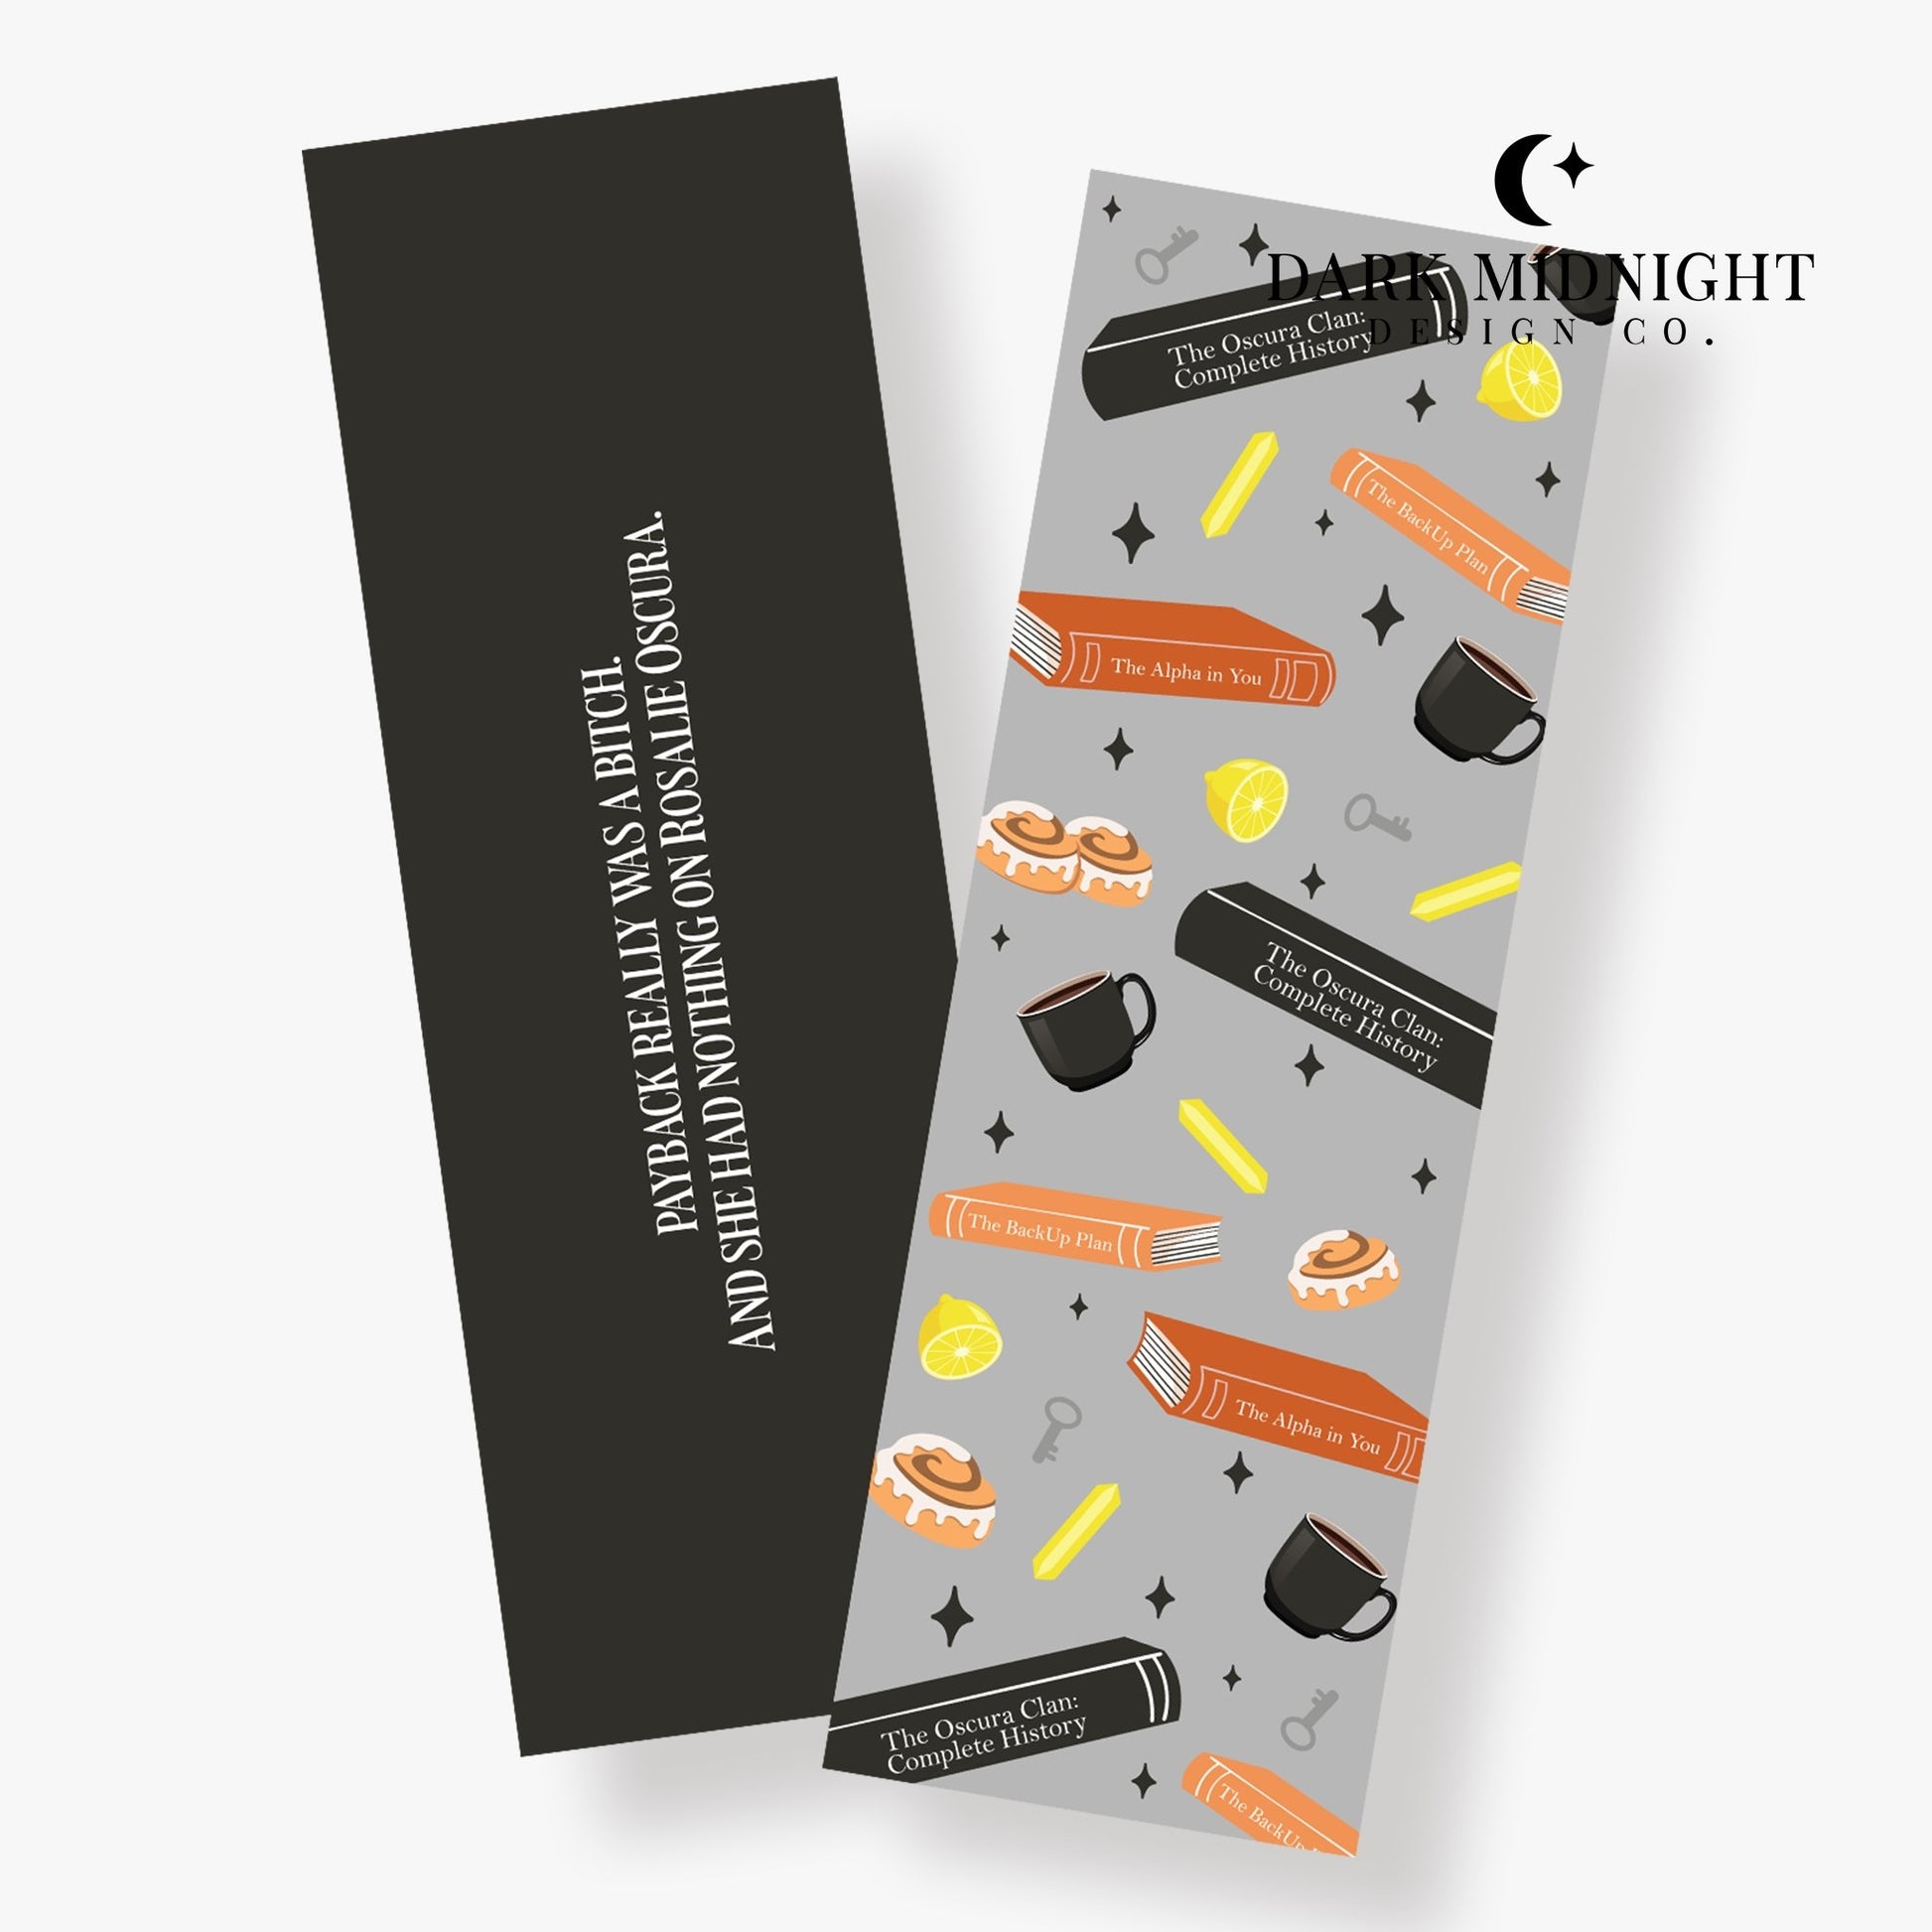 Character Anthology Bookmark - Rosalie Oscura - Officially Licensed Darkmore Penitentiary Bookmark - Dark Midnight Design Co